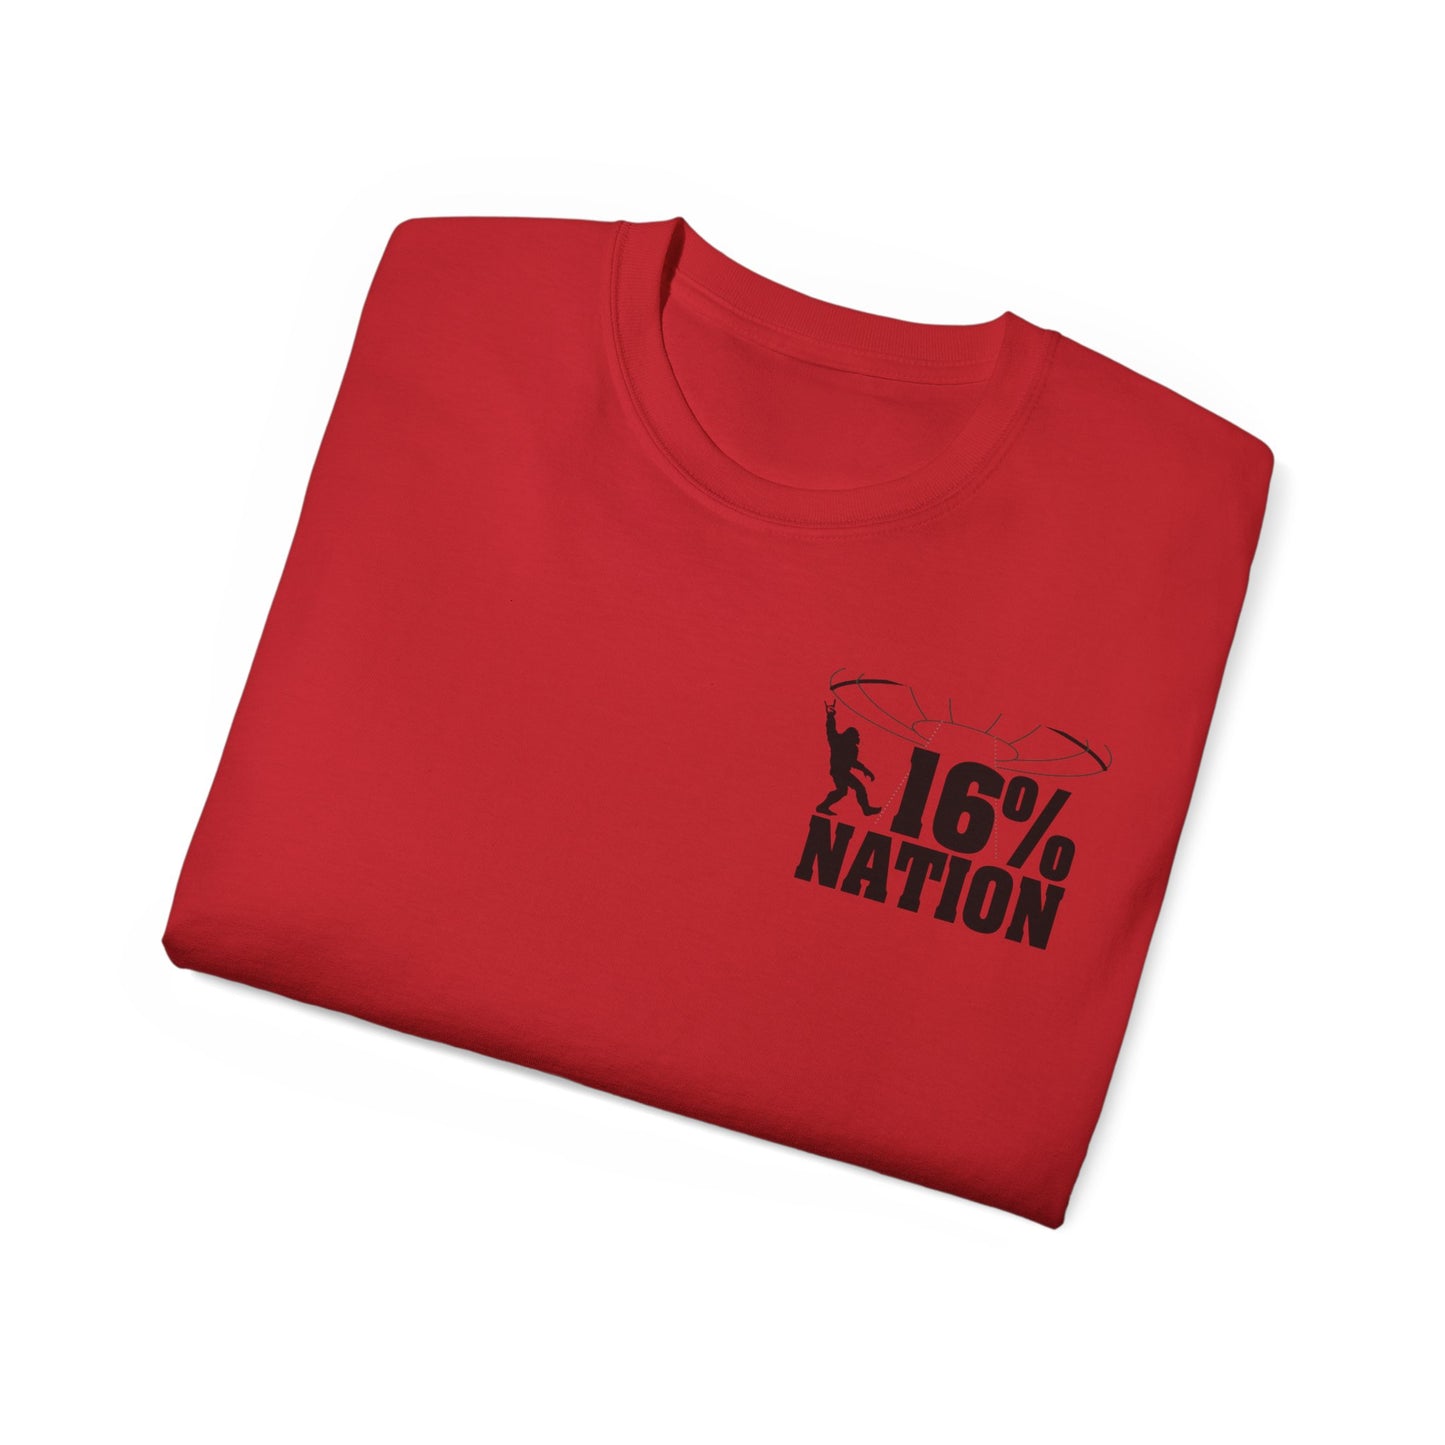 16% Nation Cryptid Research Team T-shirt